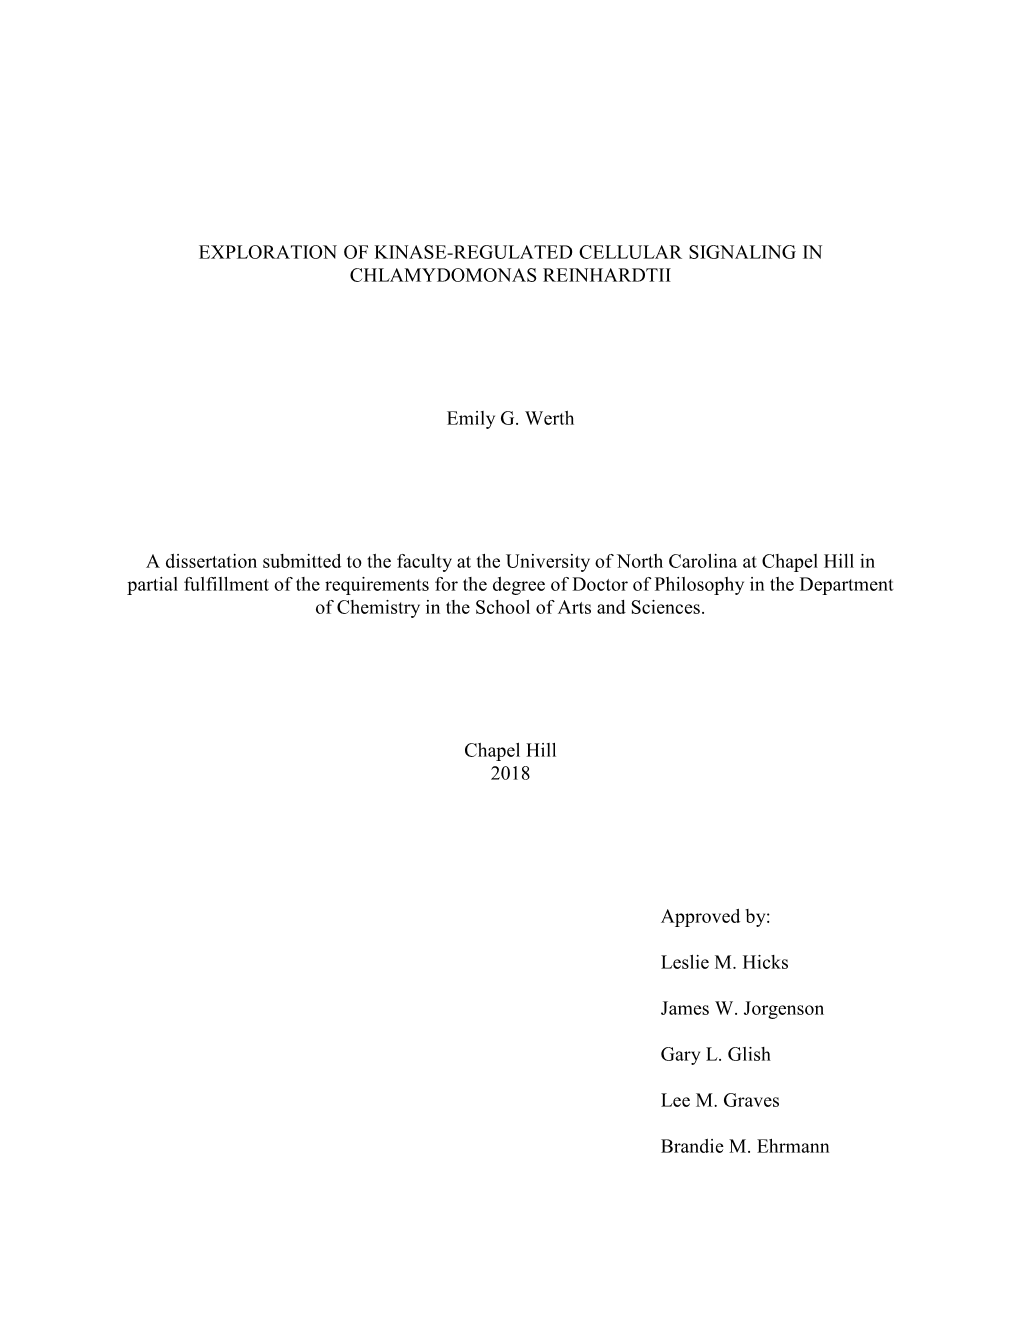 EXPLORATION of KINASE-REGULATED CELLULAR SIGNALING in CHLAMYDOMONAS REINHARDTII Emily G. Werth a Dissertation Submitted to the F